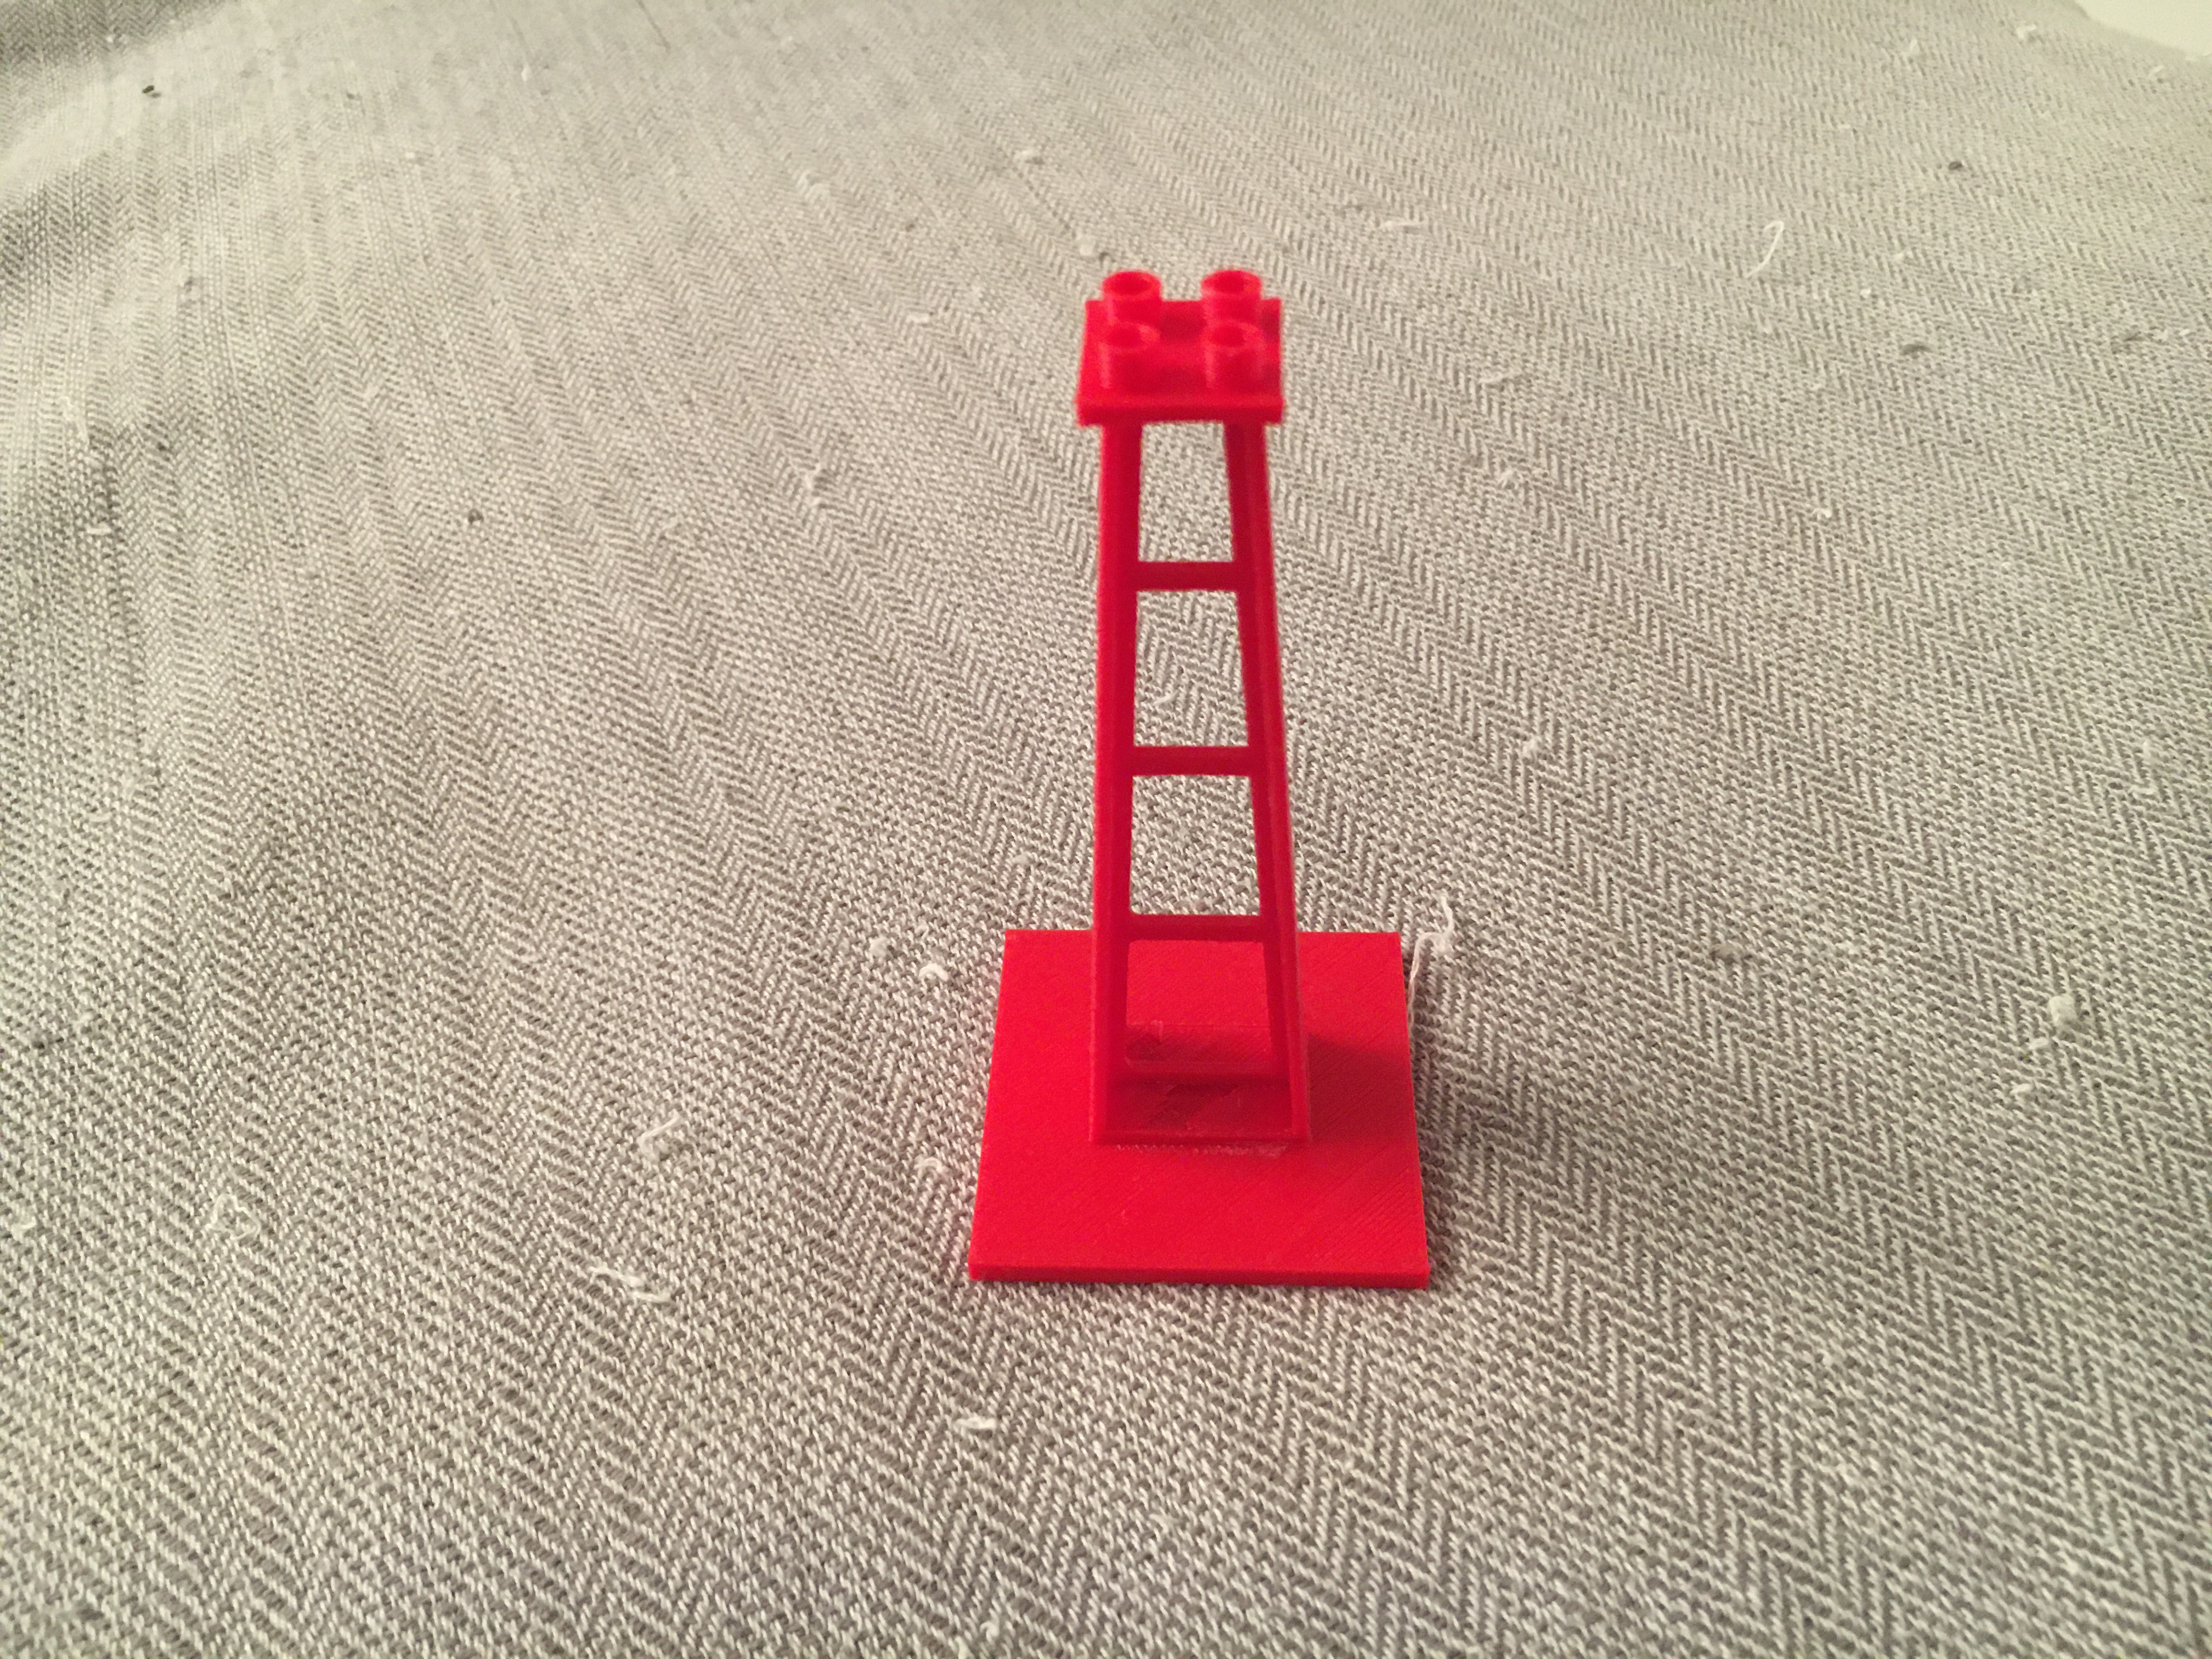 Lego Monorail Supports